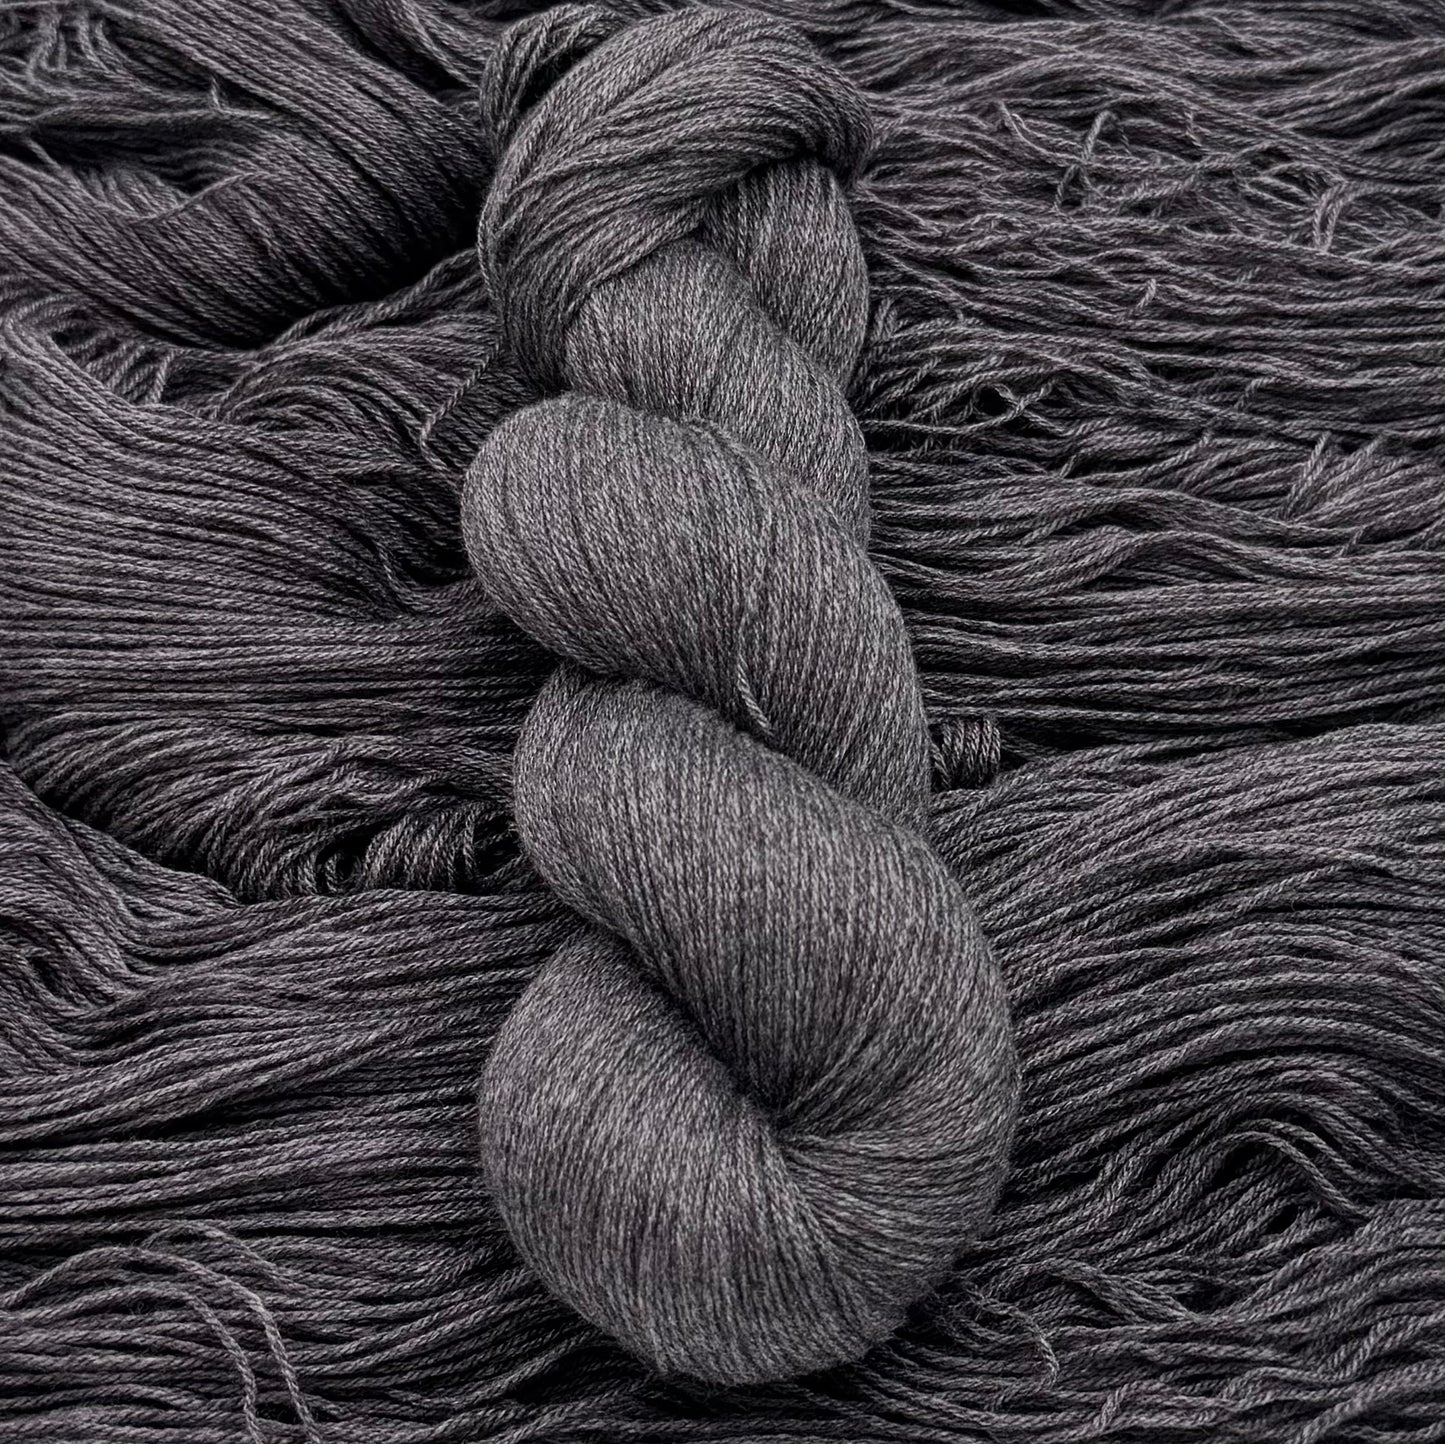 Ny Mink - Mysterious - A Knitters World